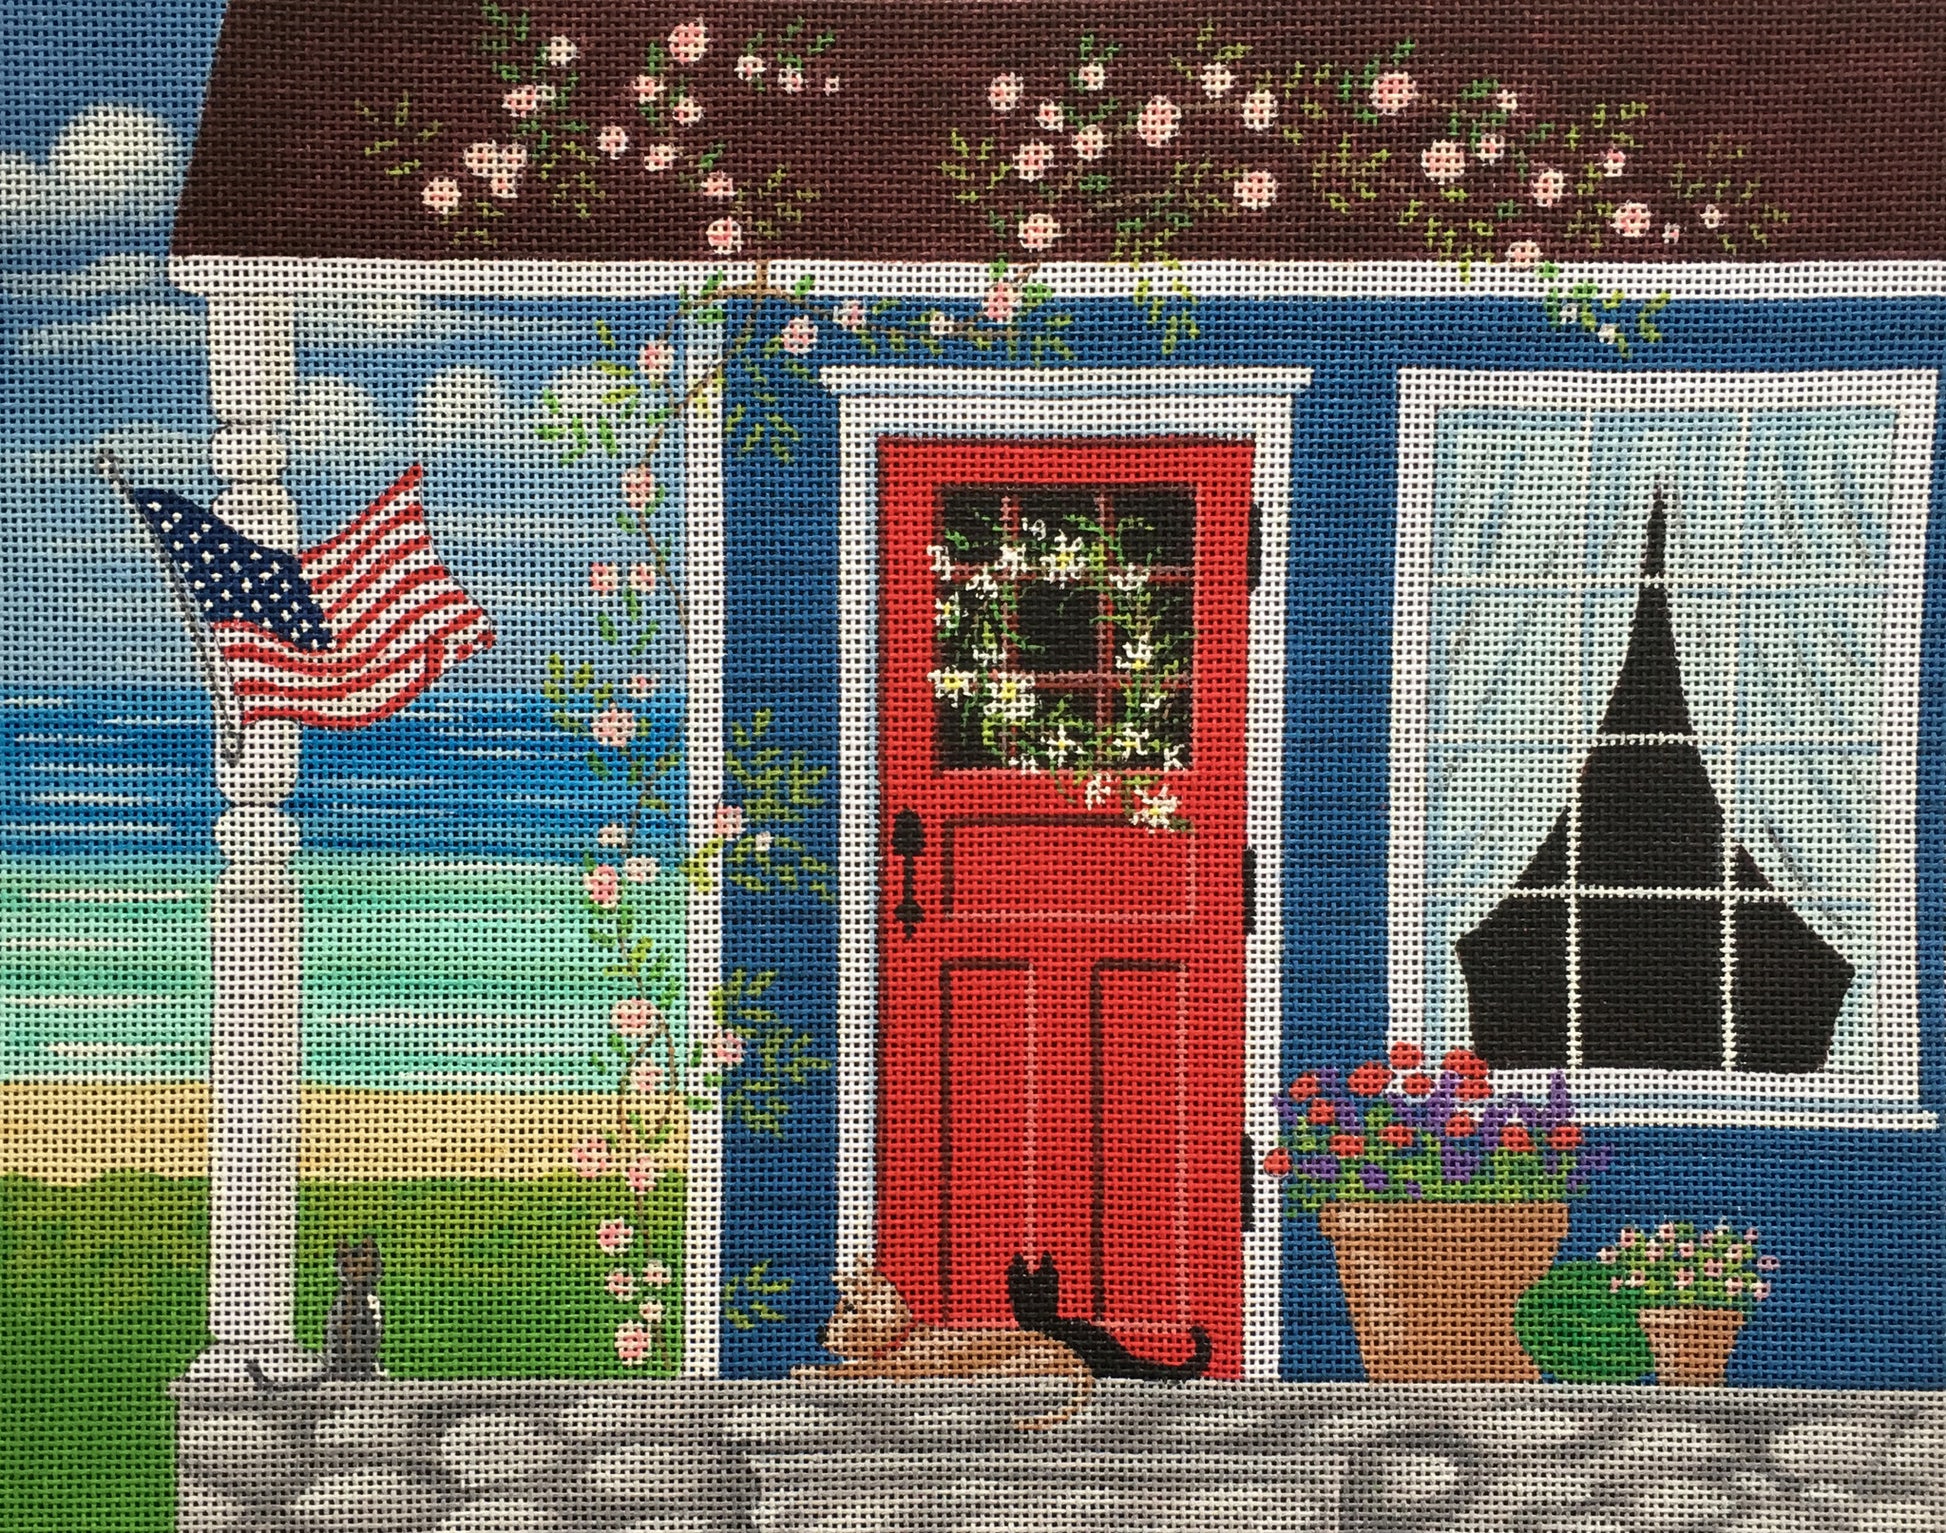 Kim Leo needlepoint canvas of a blue house with a porch and an American flag by the sea with cats and a dog